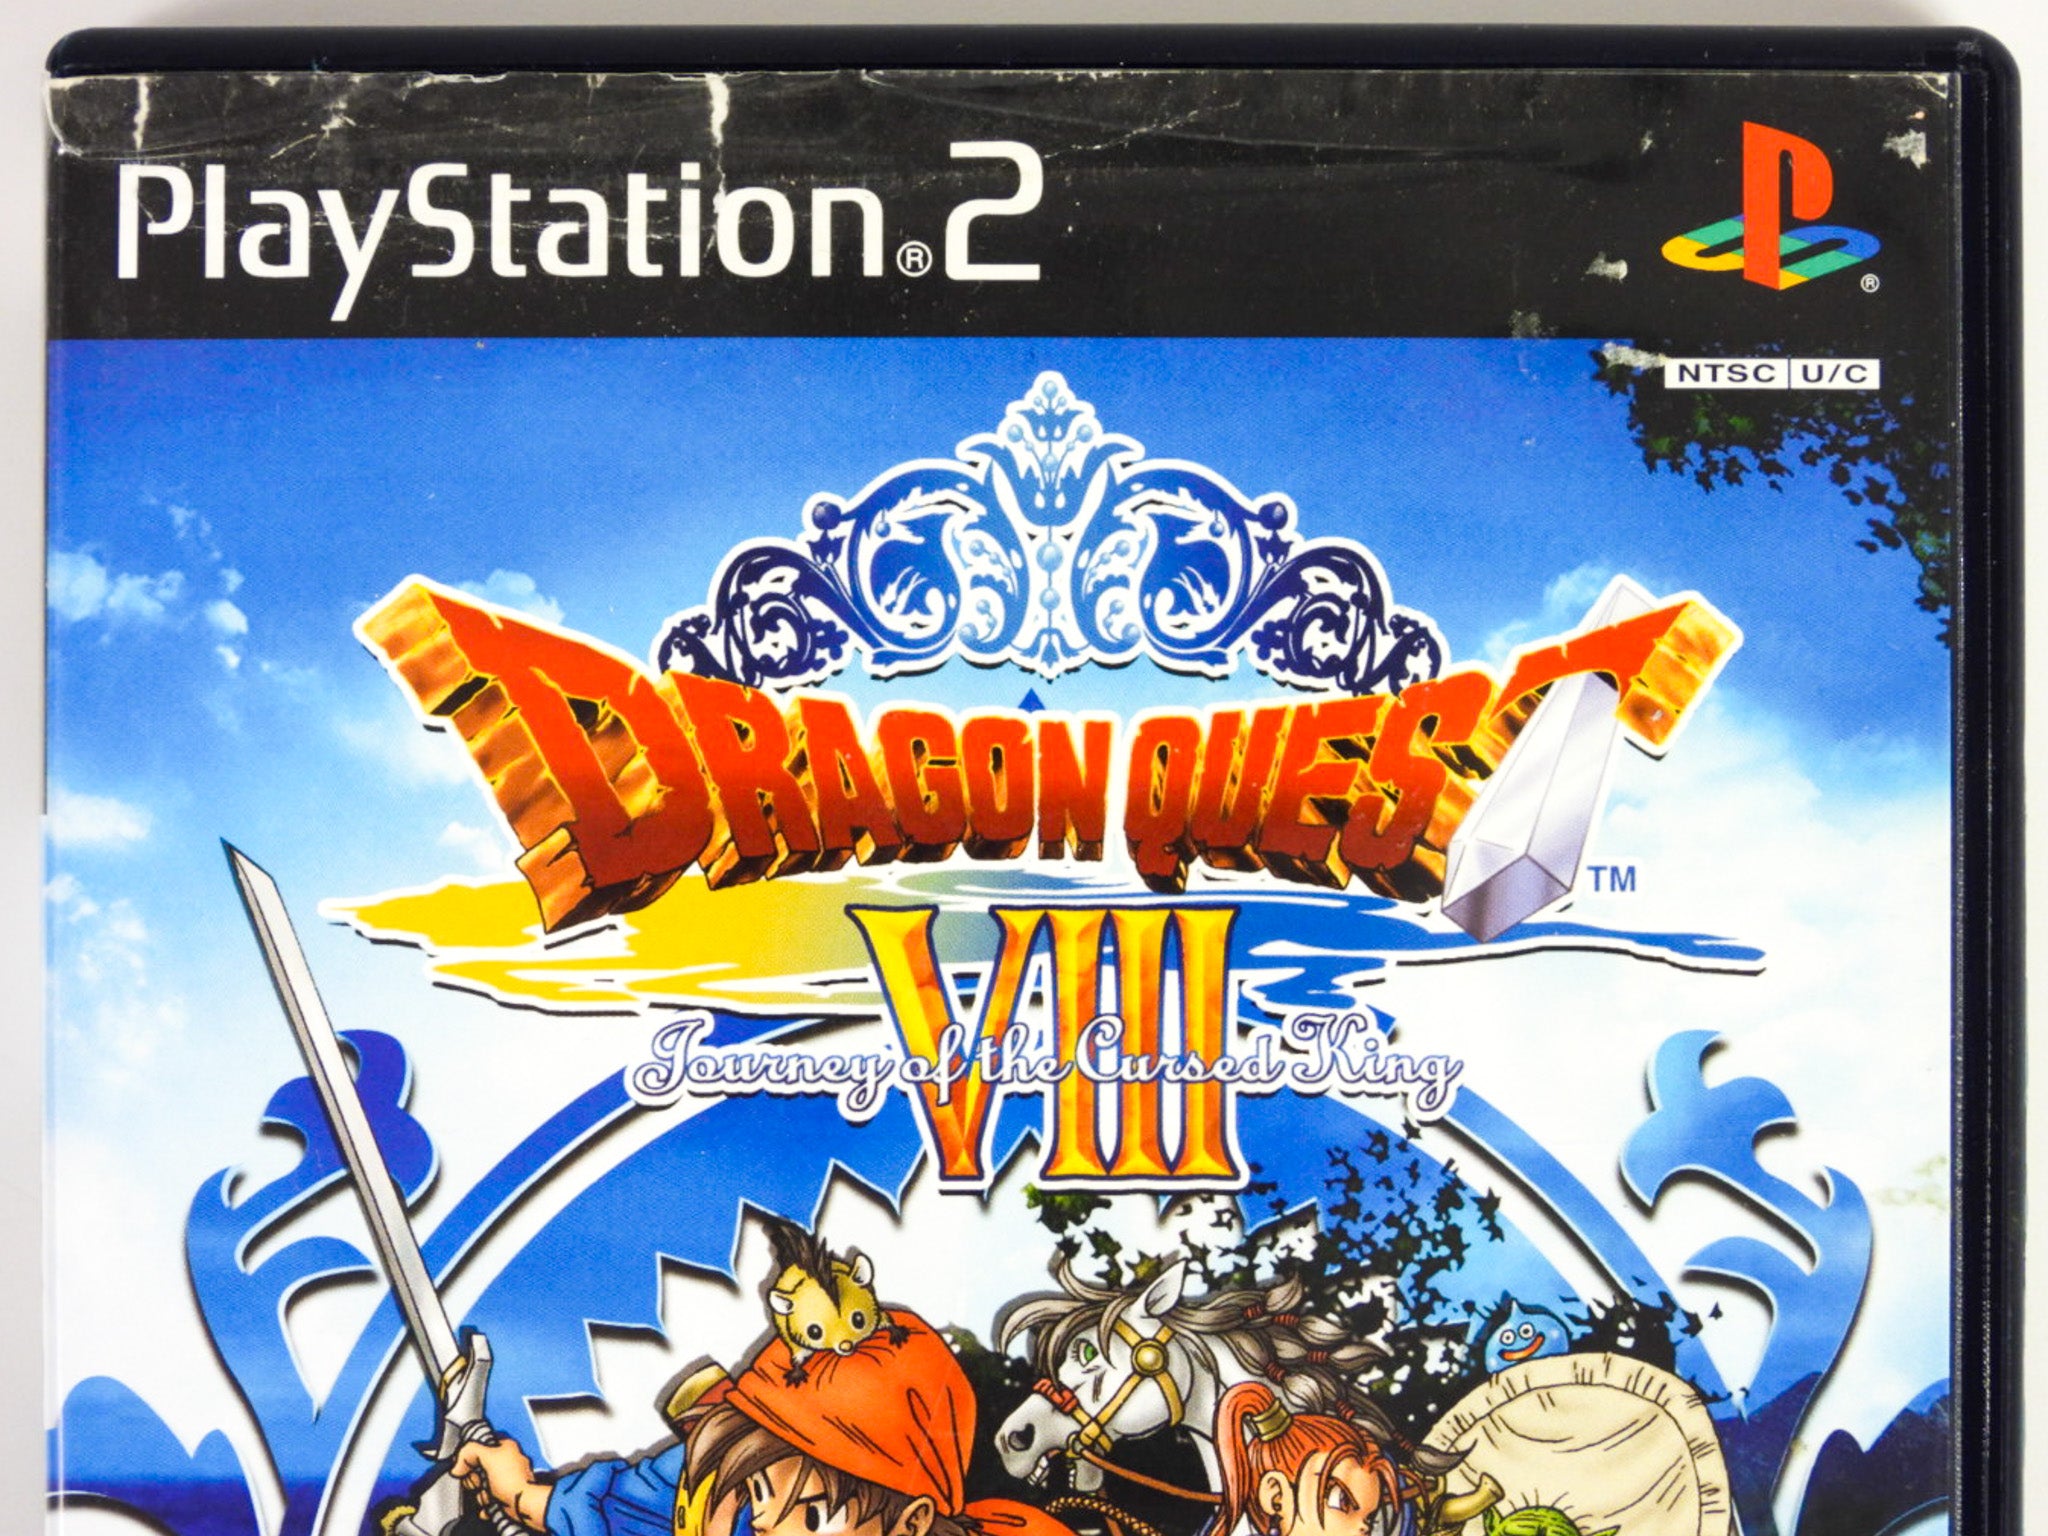 Dragon Quest VIII 8 Journey of the Cursed King (PS2) CIB PAL